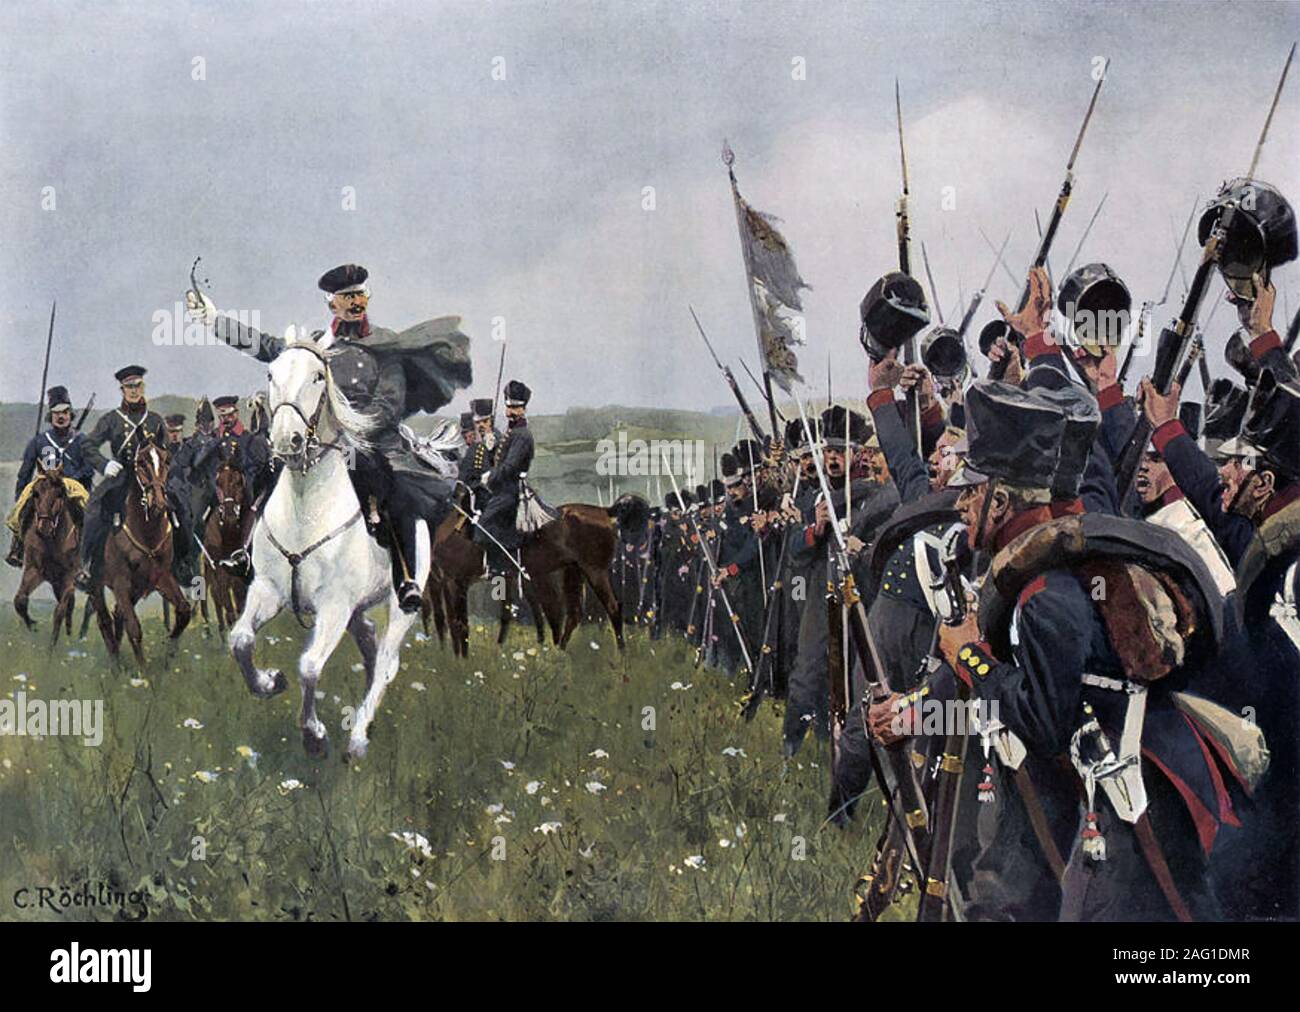 GEBHARD von BLUCHER (1742-1819) Prussian Field Marshal rallies his troops before the `Battle of Waterloo. painting by Carl Rochling Stock Photo